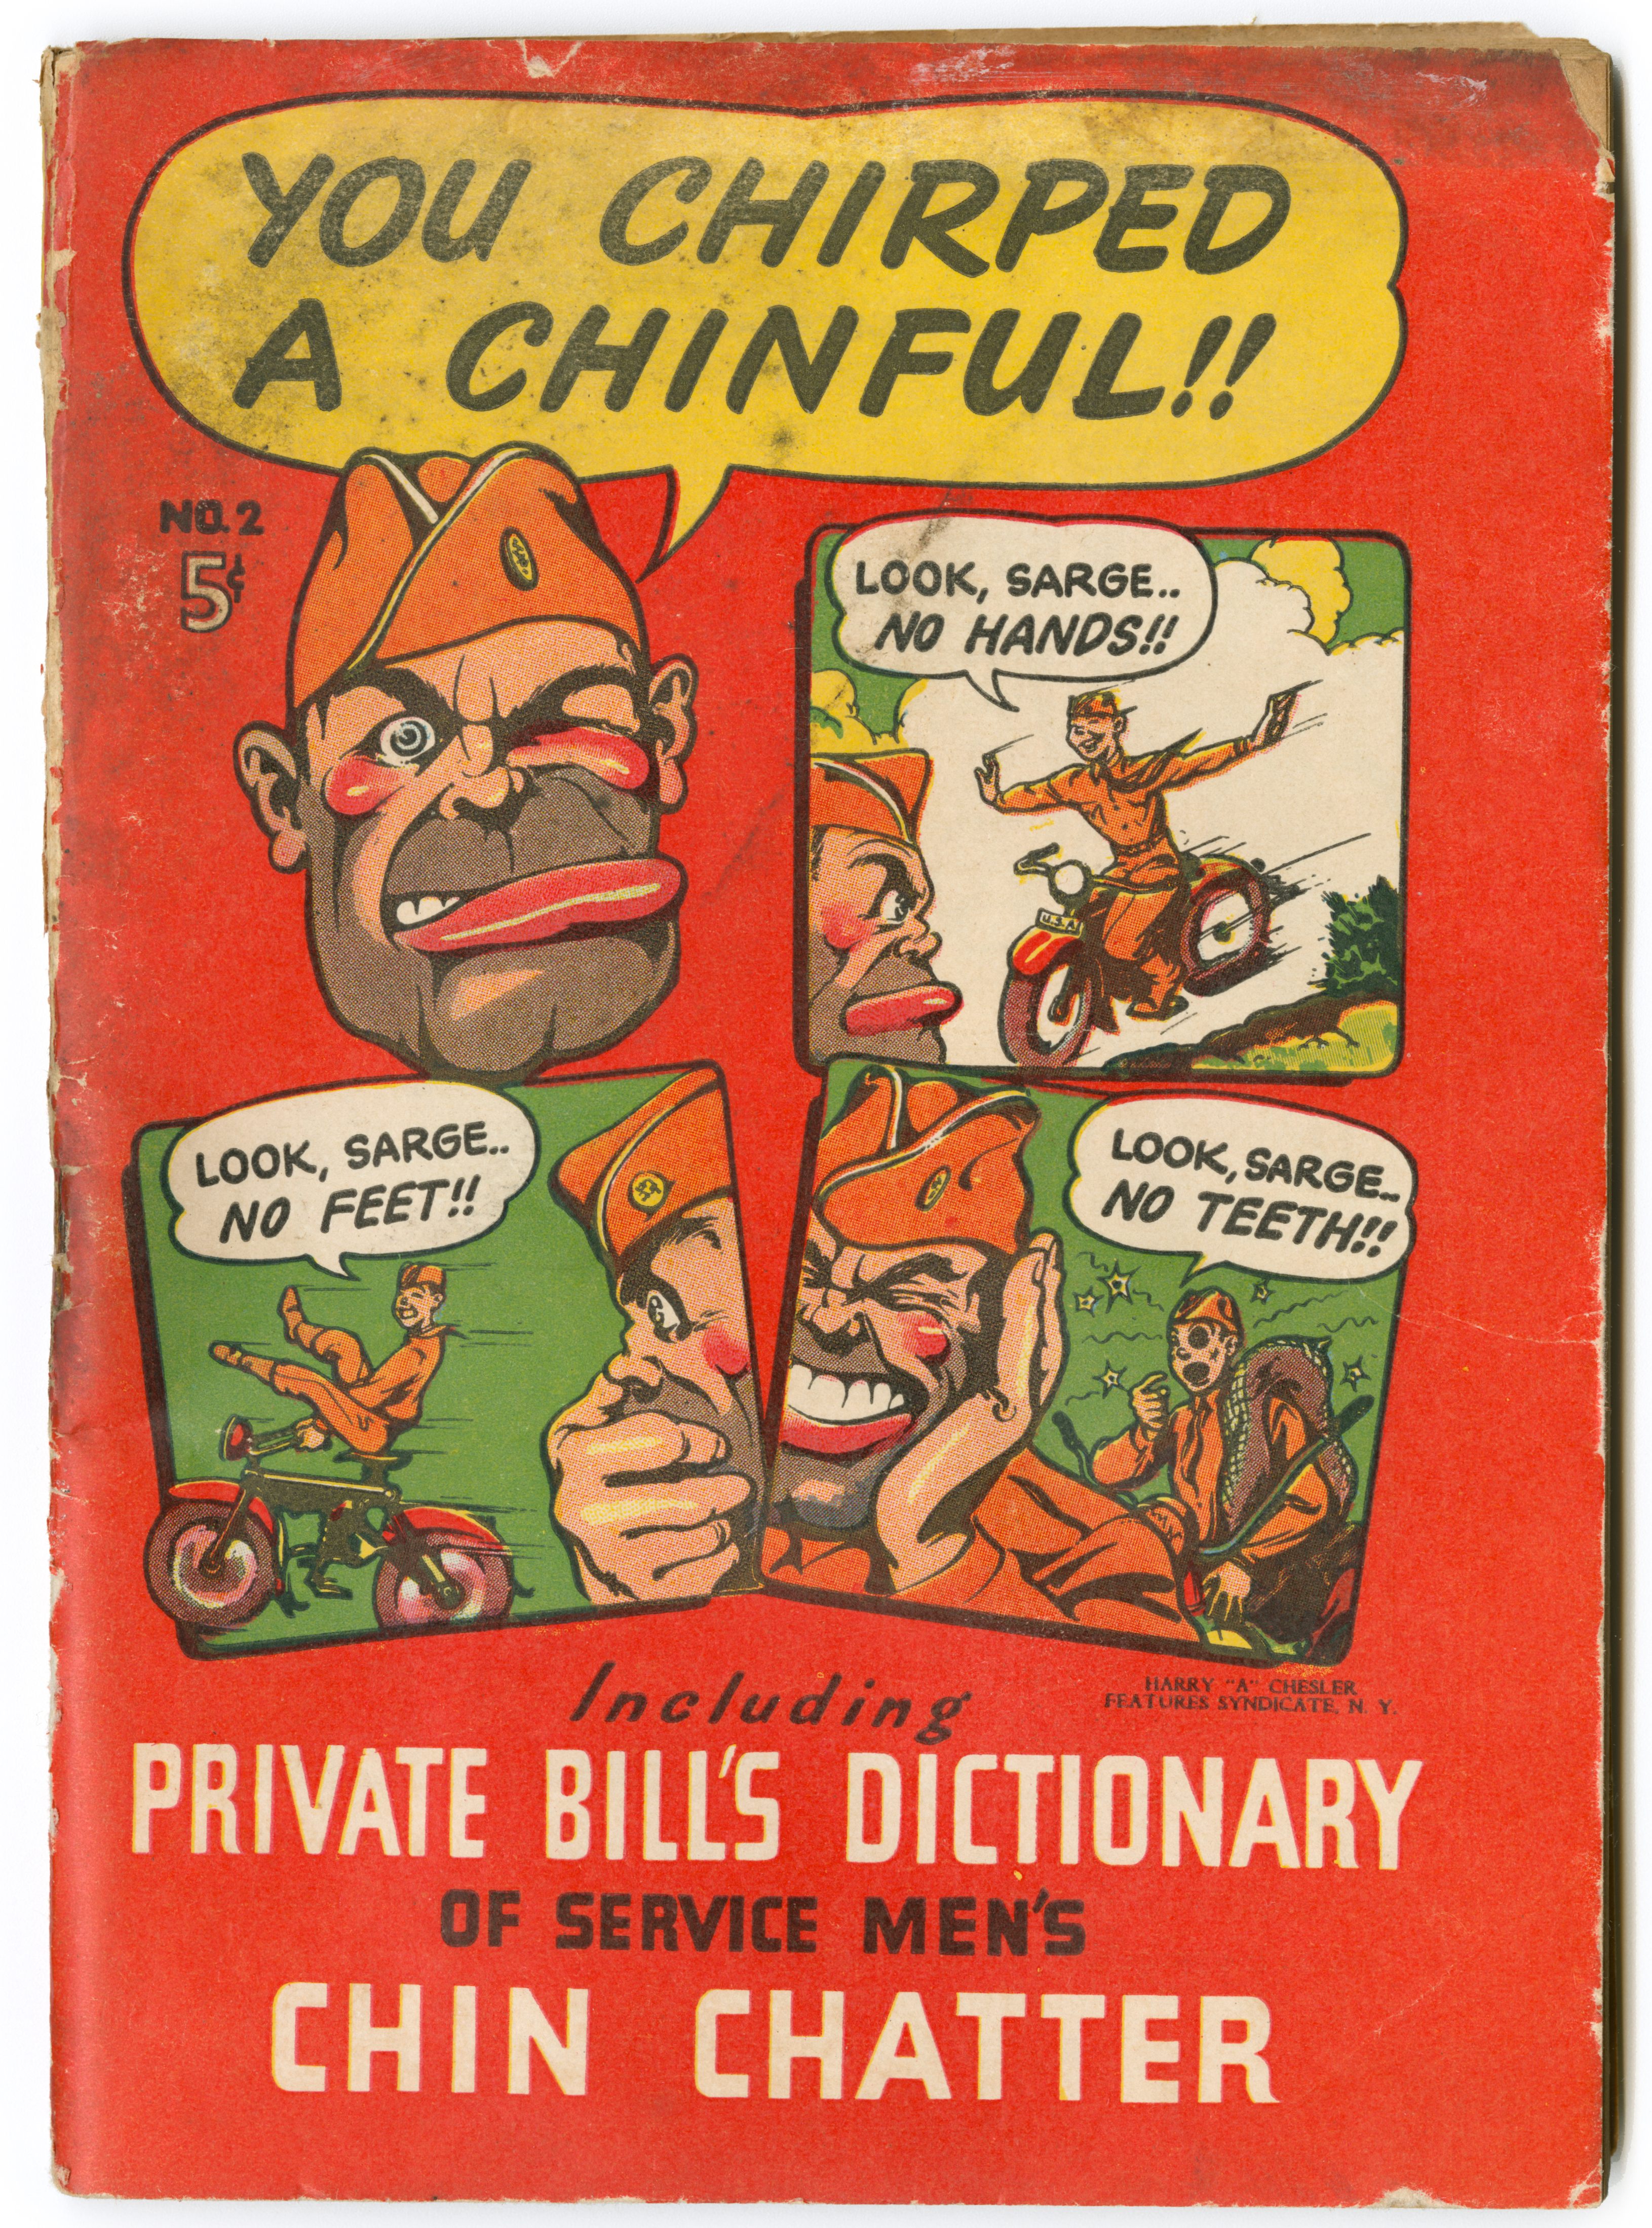 <em>You Chirped a Chinful!!</em>, with its comic aesthetic and misogynist content, represents a particular moment in military language. 